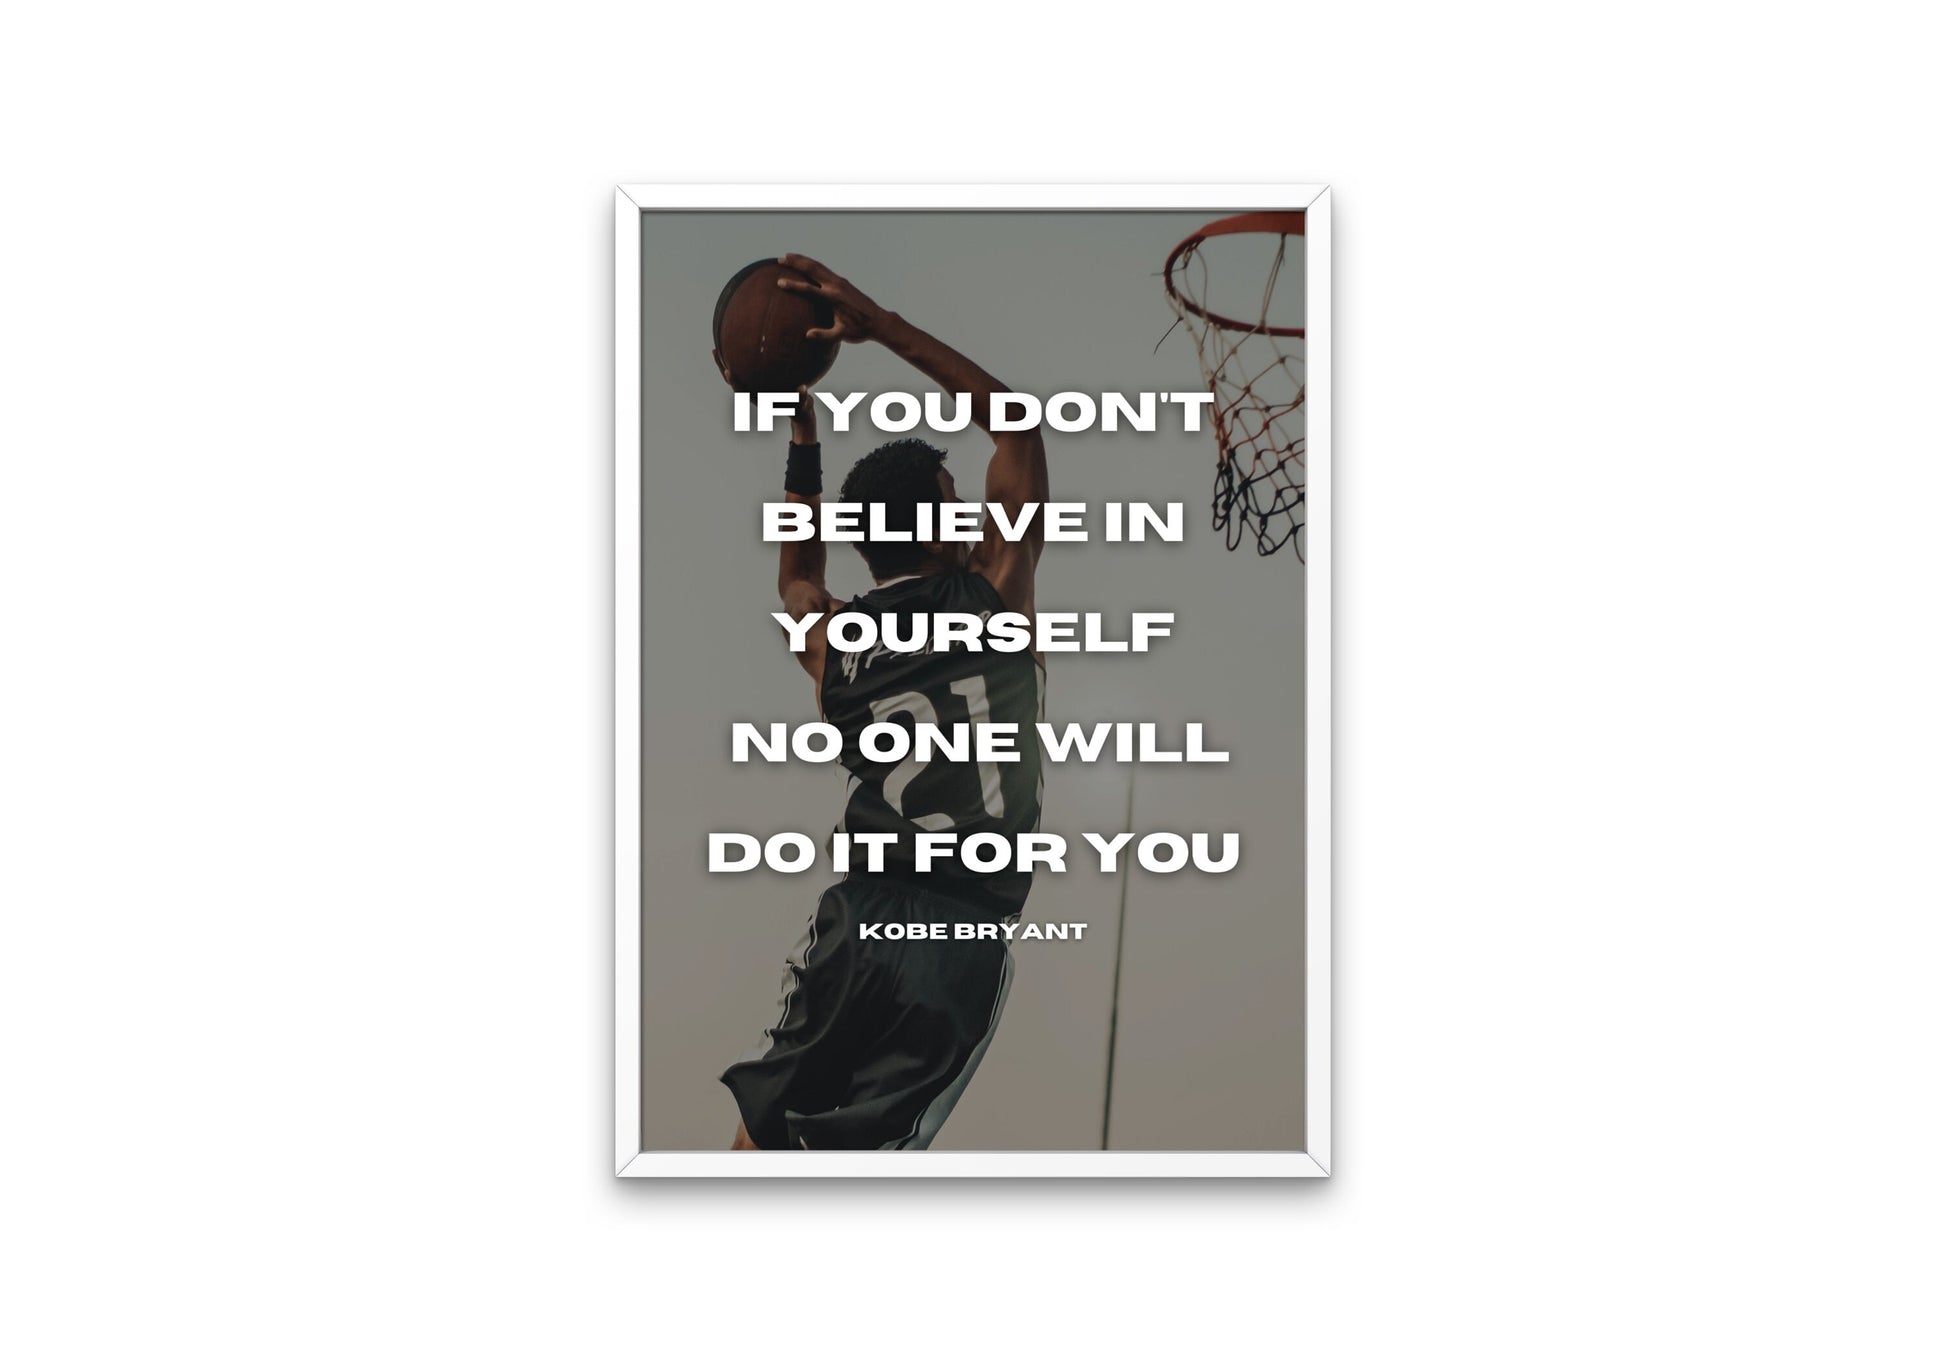 Basketball Motivational Poster PRINTABLE, Kobe Bryant, Nba fans, Sports Wall art, Basketball gifts, Believe in Yourself, Inspirational